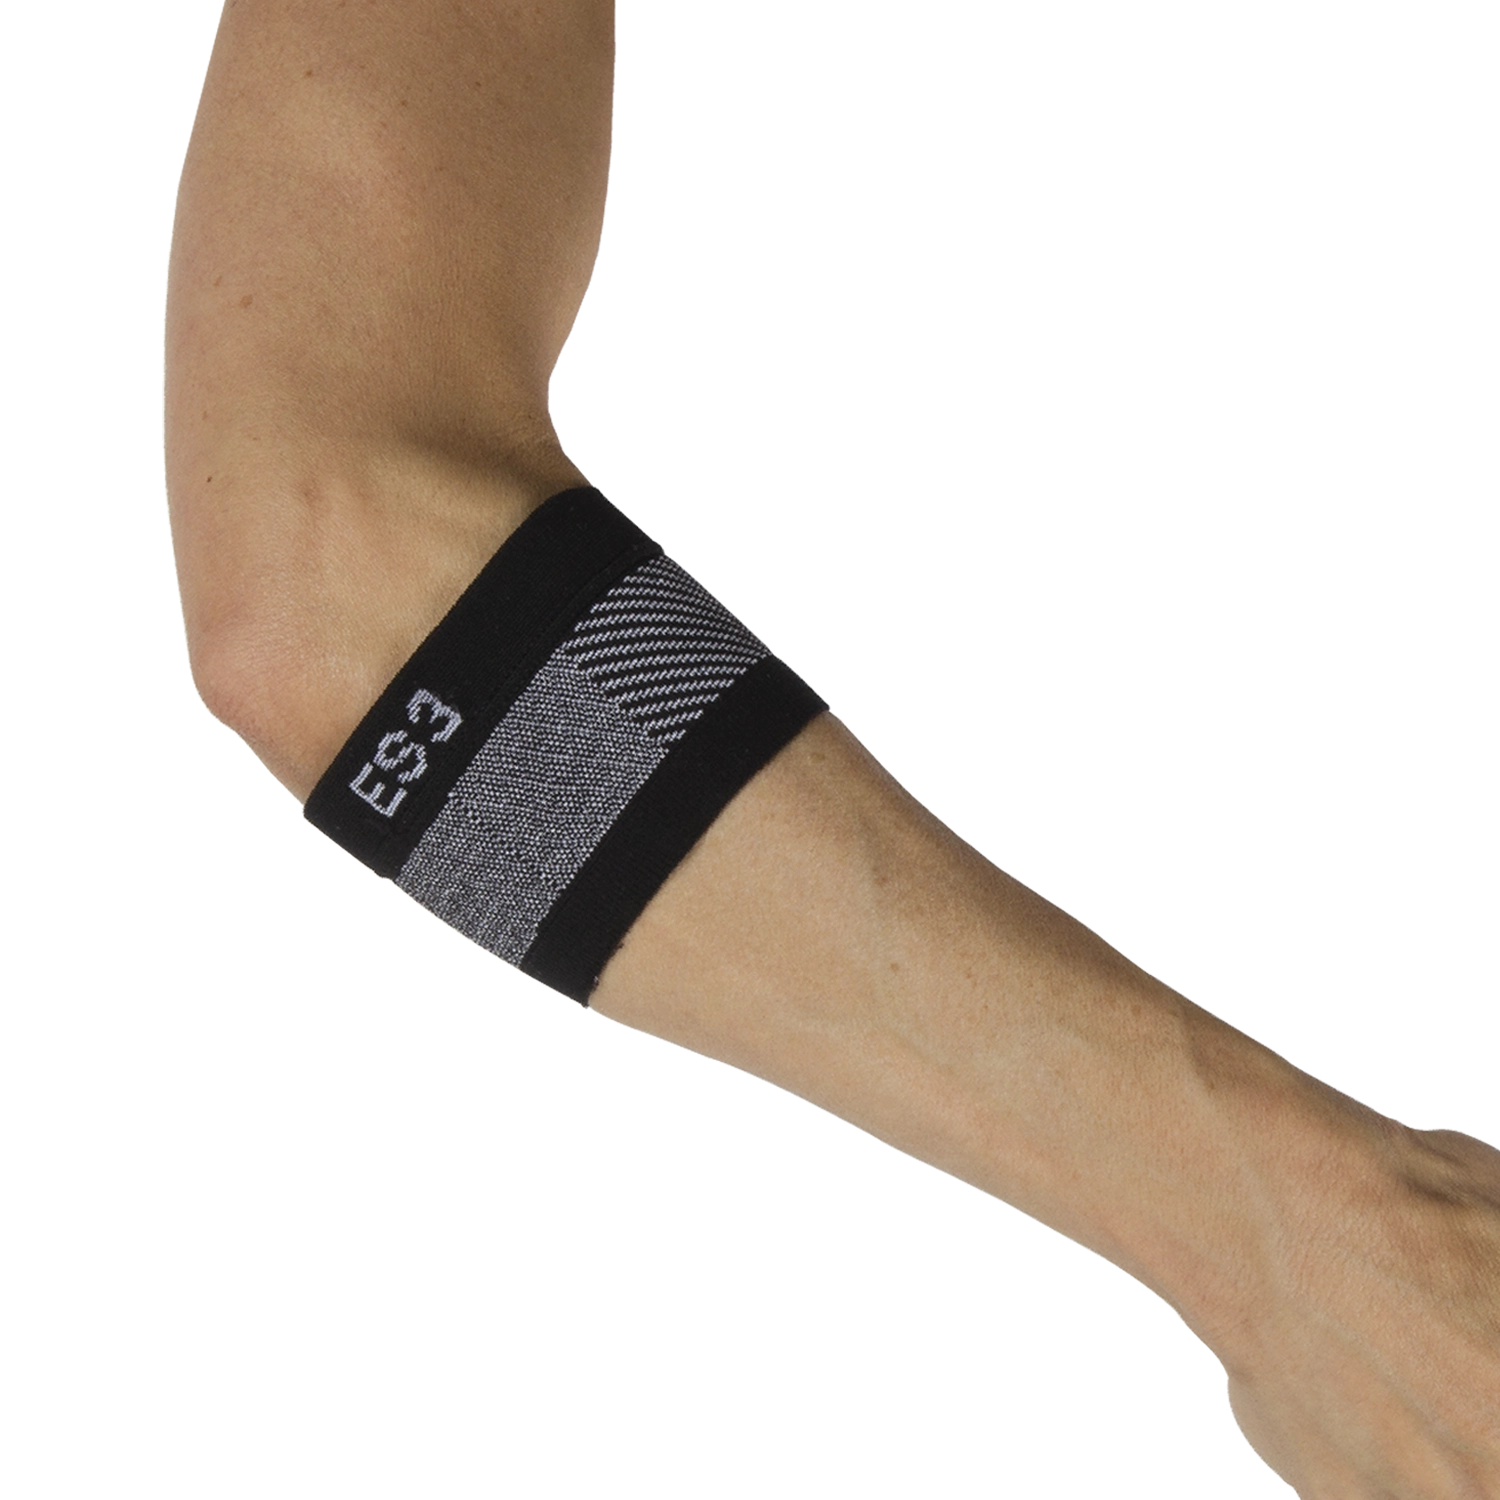 Compression Elbow Brace - The ES3 – Orthosleeve